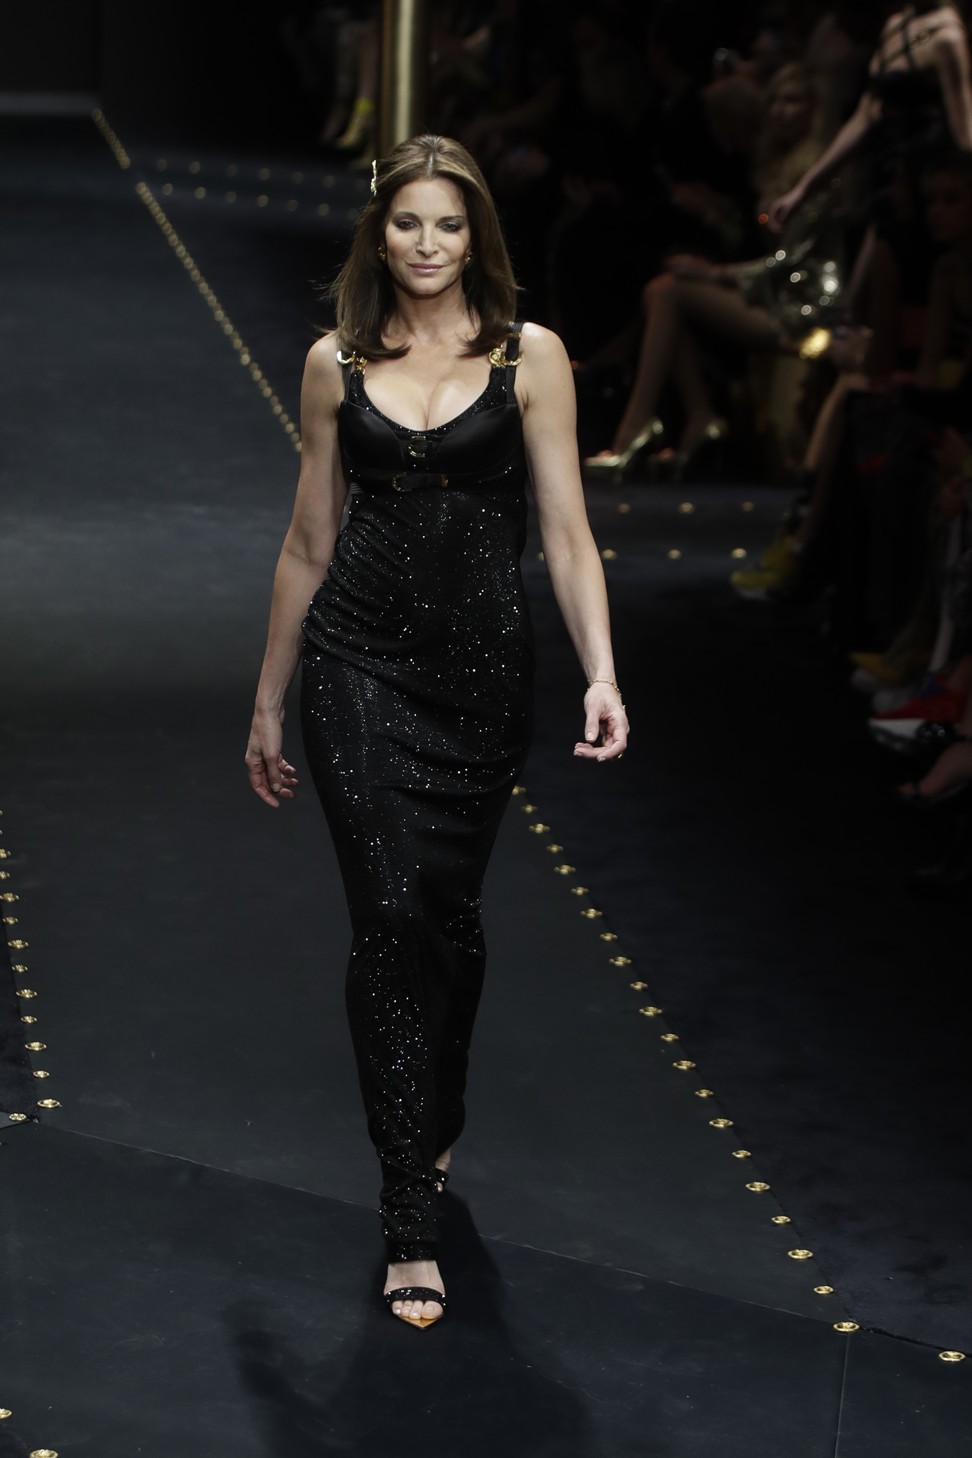 Stephanie Seymour models Versace on the catwalk in Milan. The label is doubling down on its ’90s glamazon aesthetic. Photo: AP